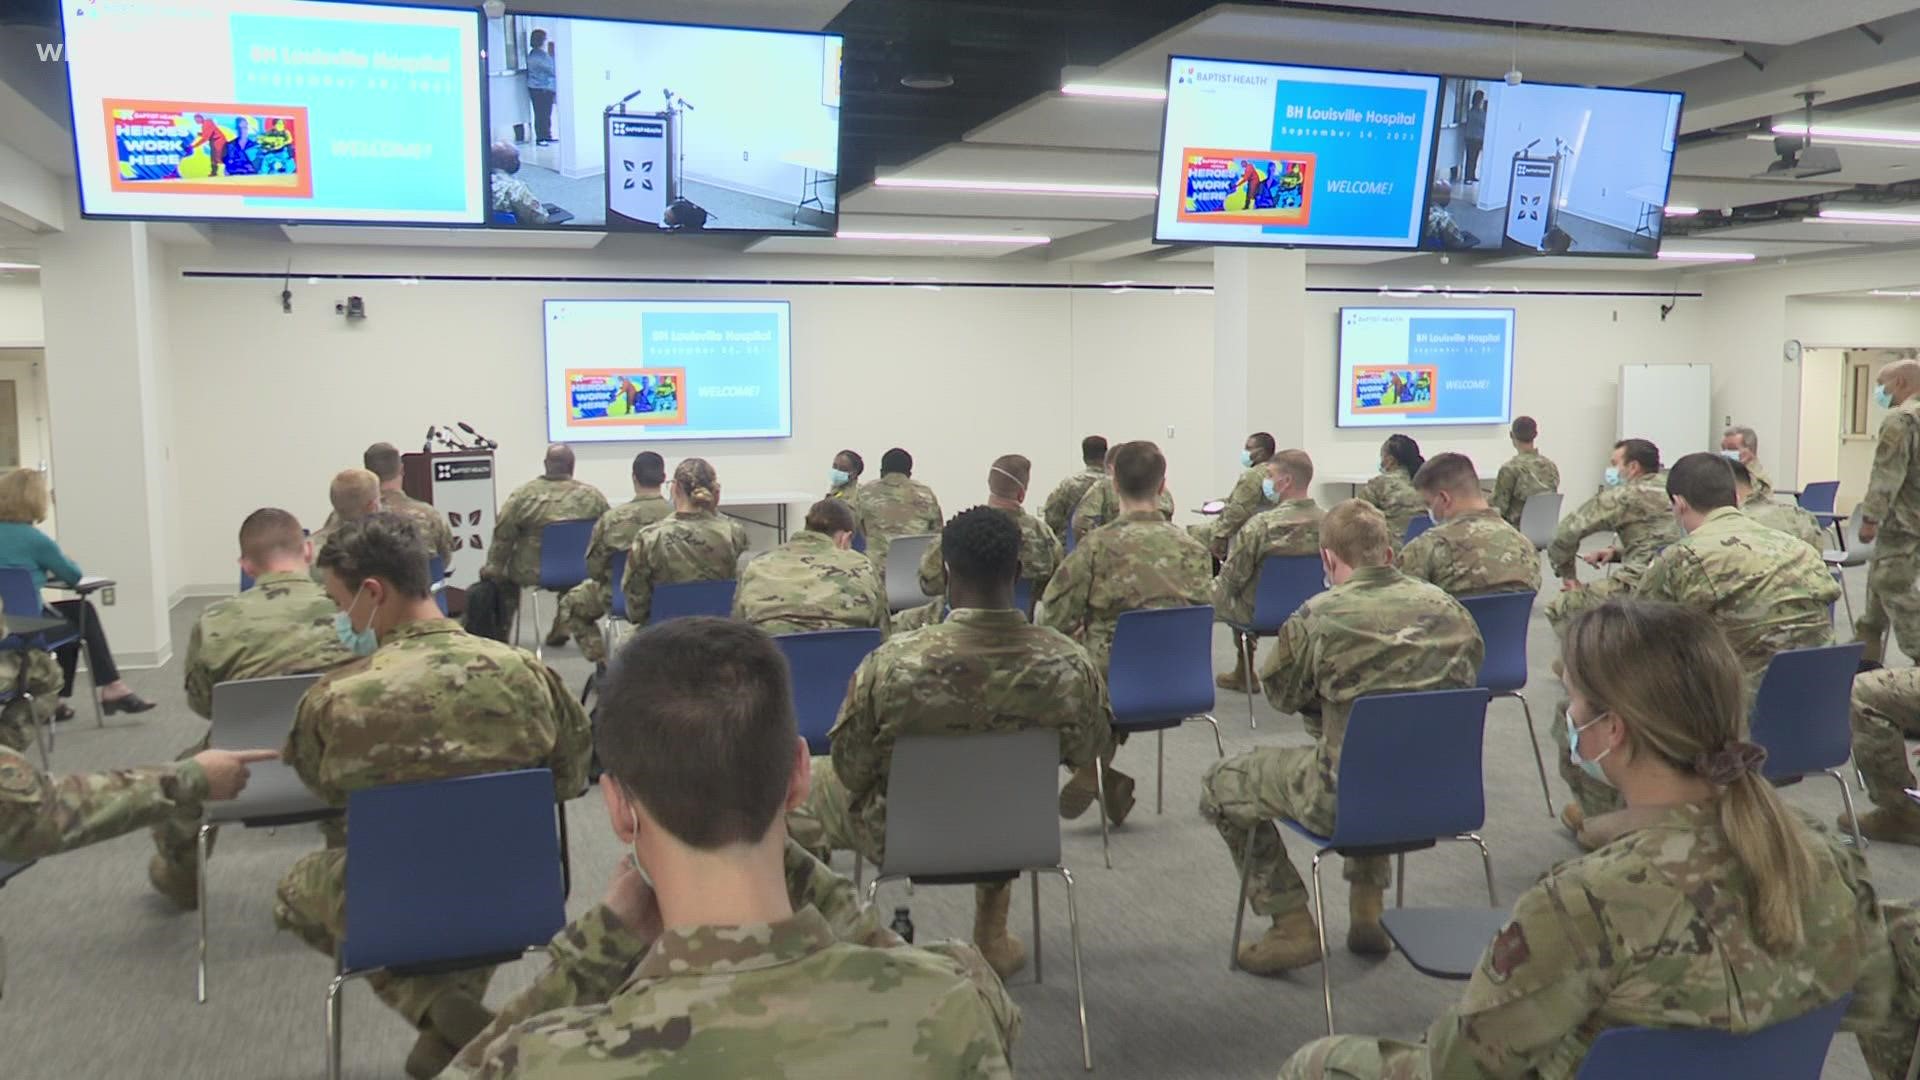 UofL and Baptist Health Louisville now has dozens of National Guard members helping alleviate the stress on health care workers due to the COVID surge.